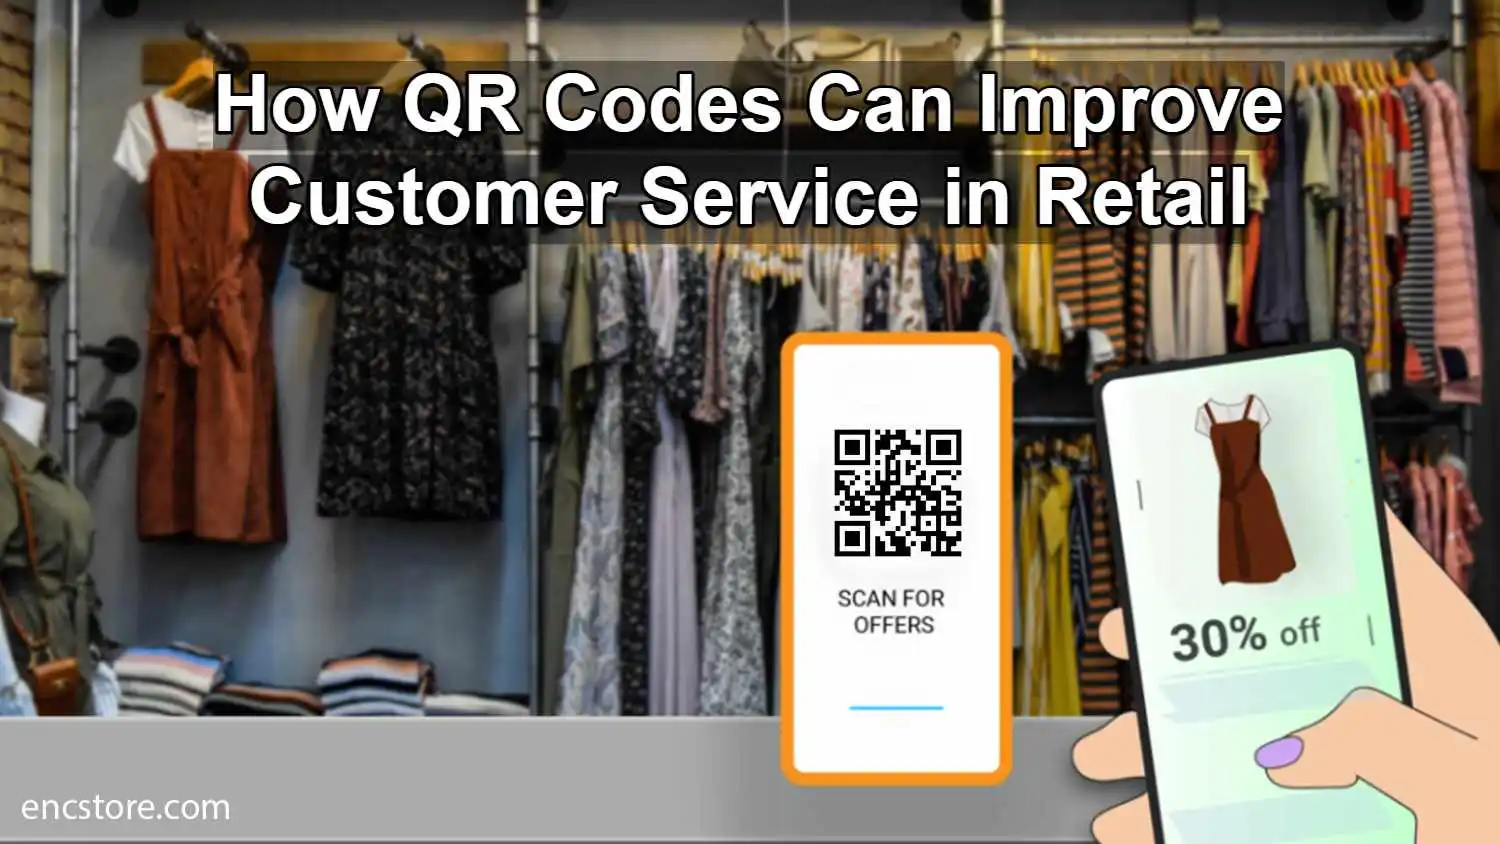 How QR Codes Can Improve Customer Service in Retail